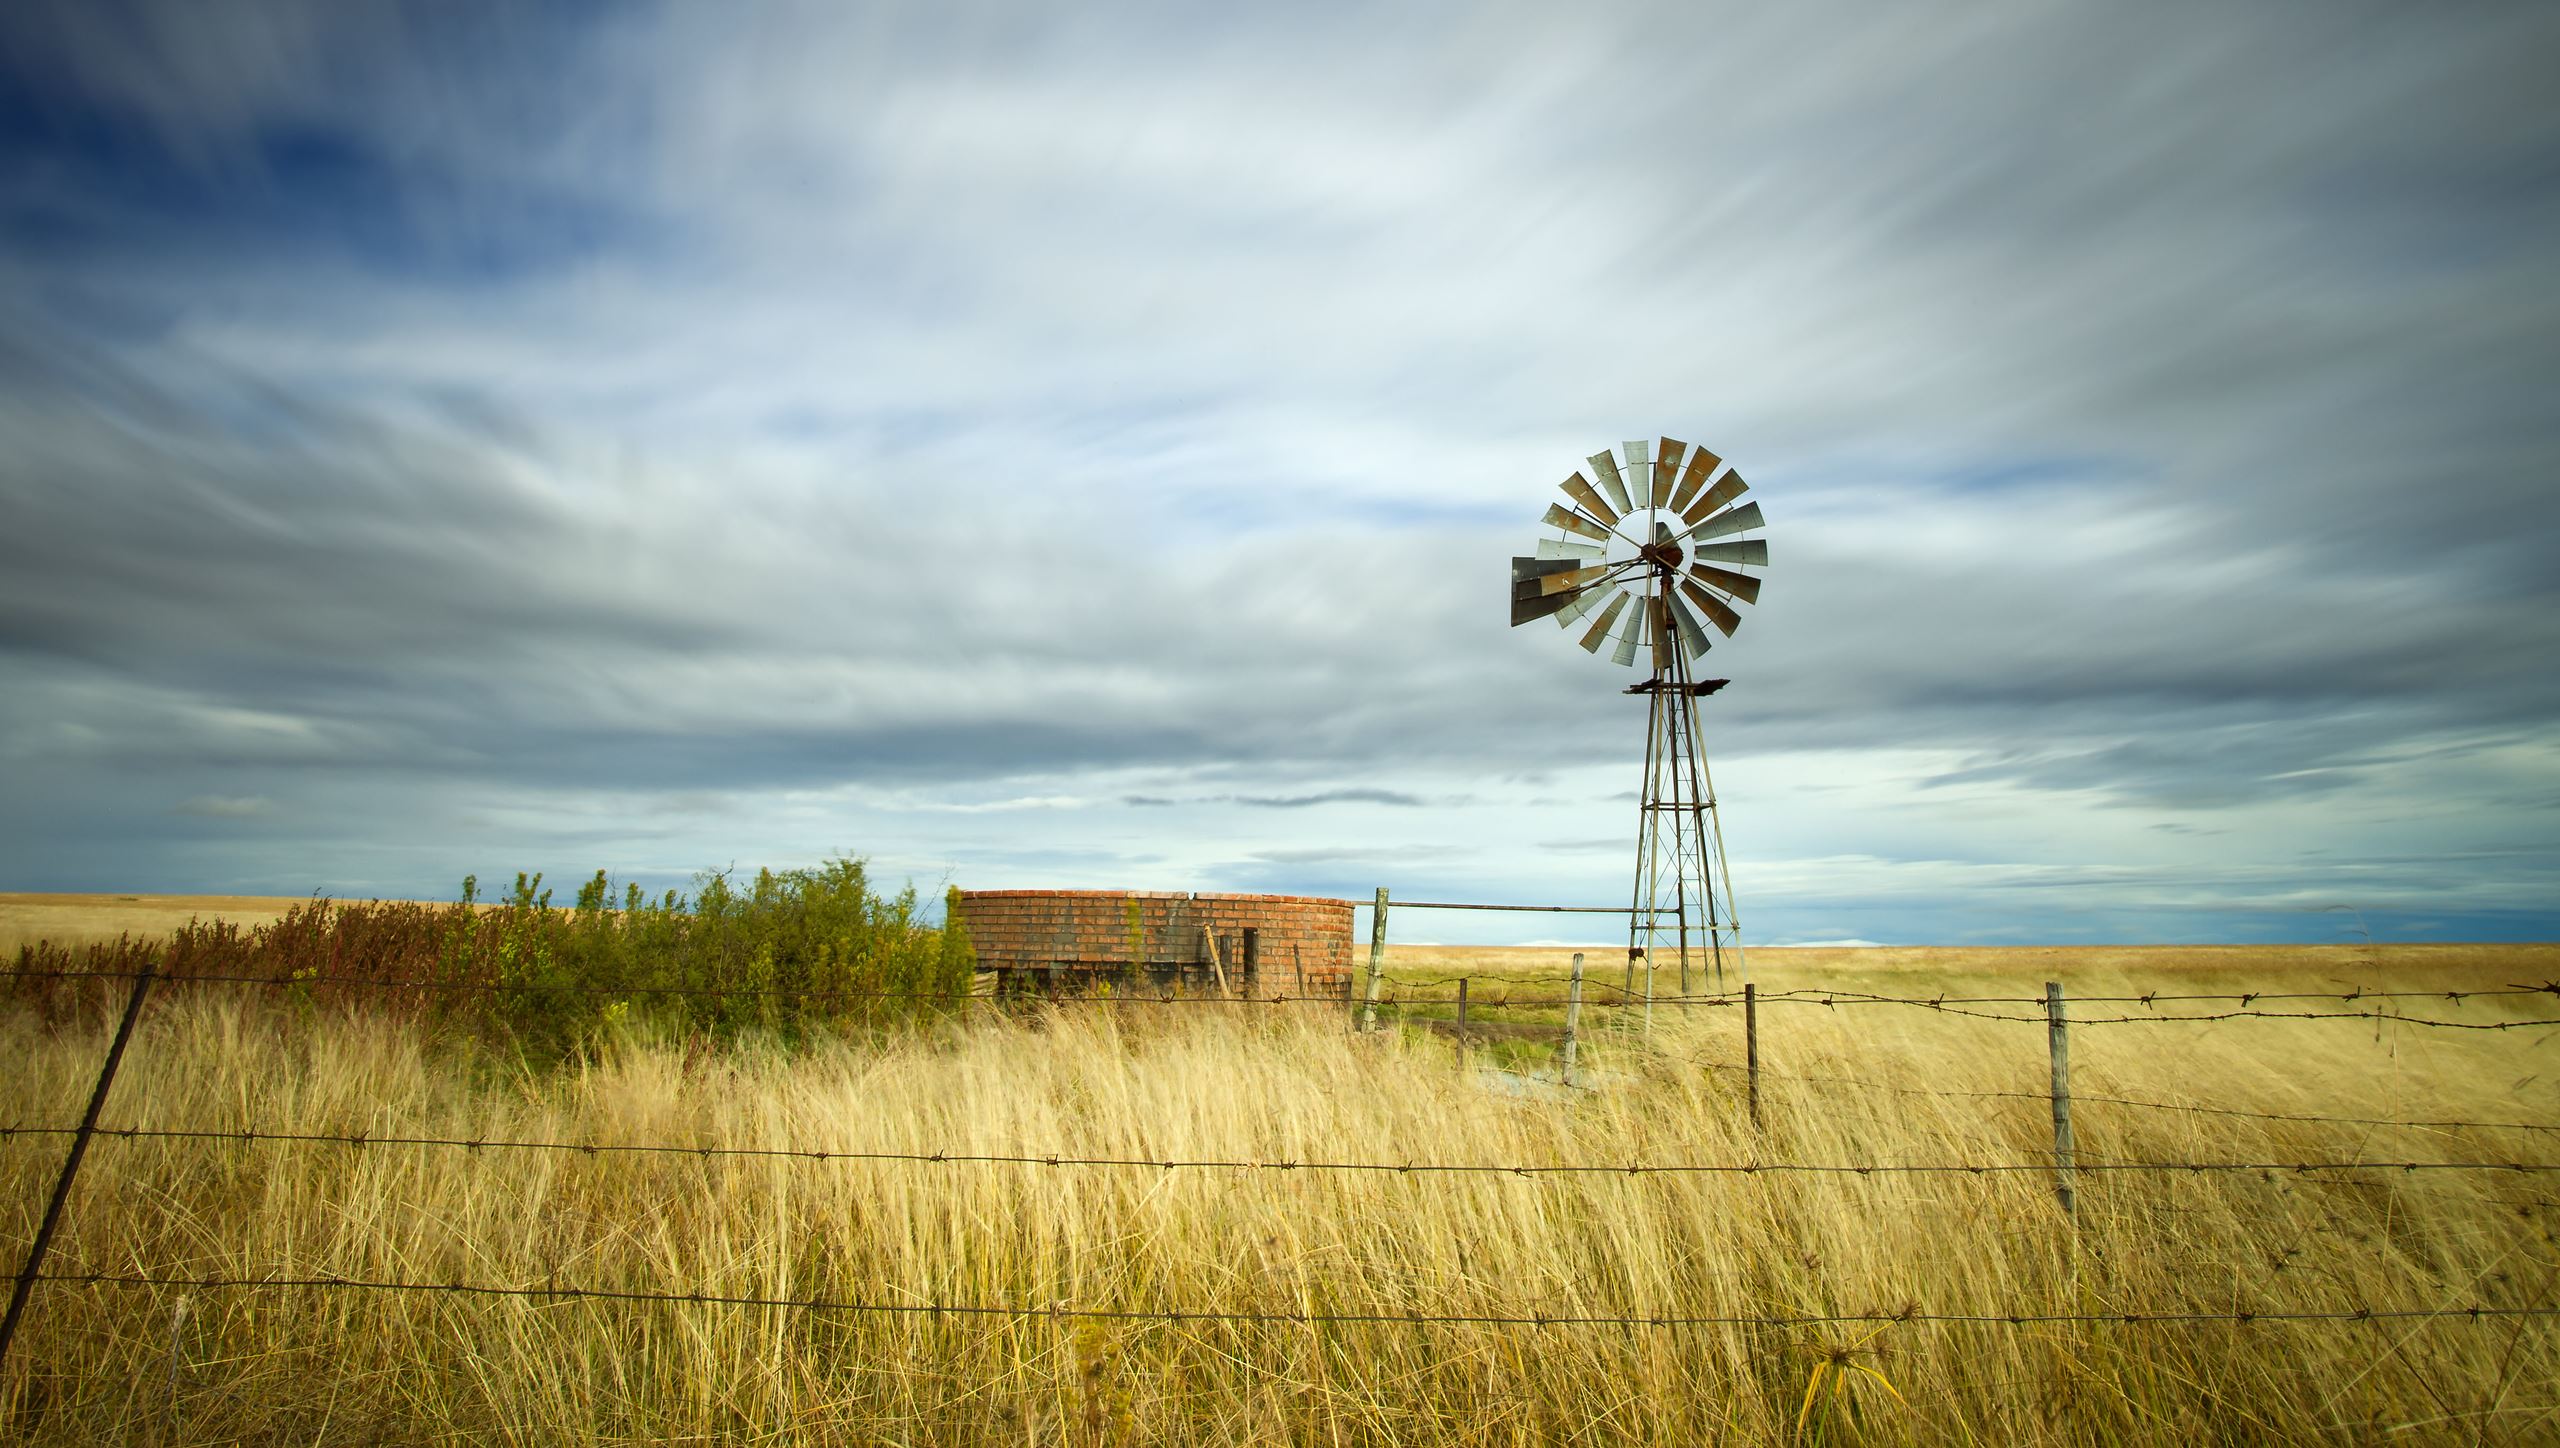 windmill and small brick building in a field